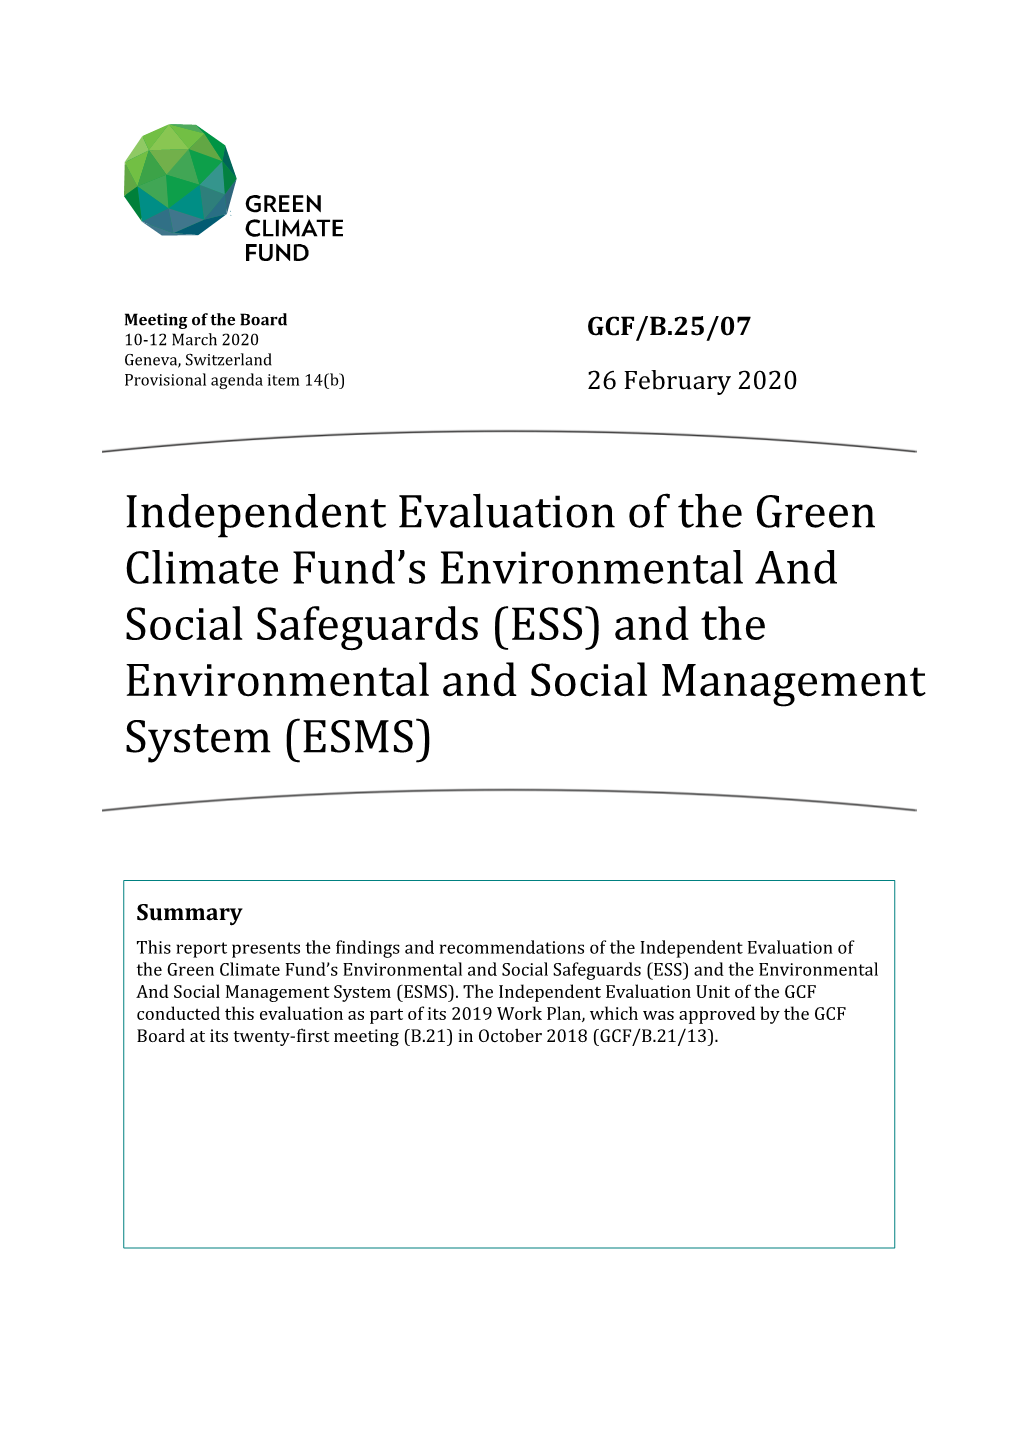 Independent Evaluation of the Green Climate Fund’S Environmental and Social Safeguards (ESS) and the Environmental and Social Management System (ESMS)